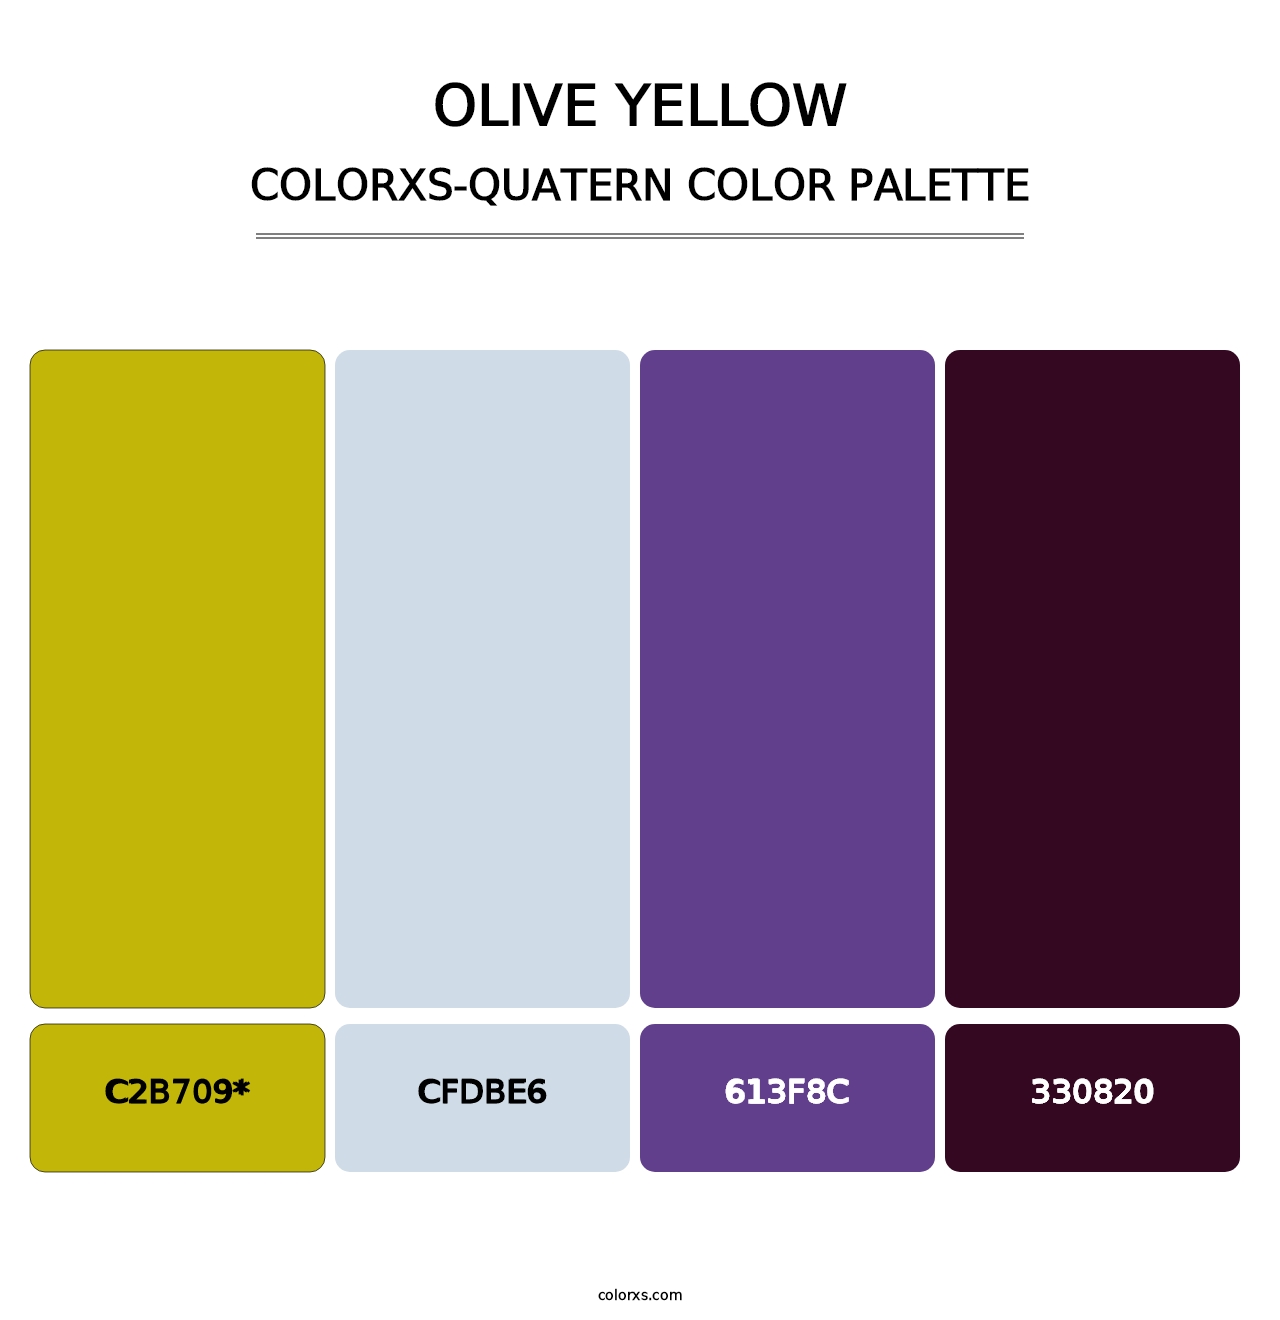 Olive Yellow - Colorxs Quatern Palette